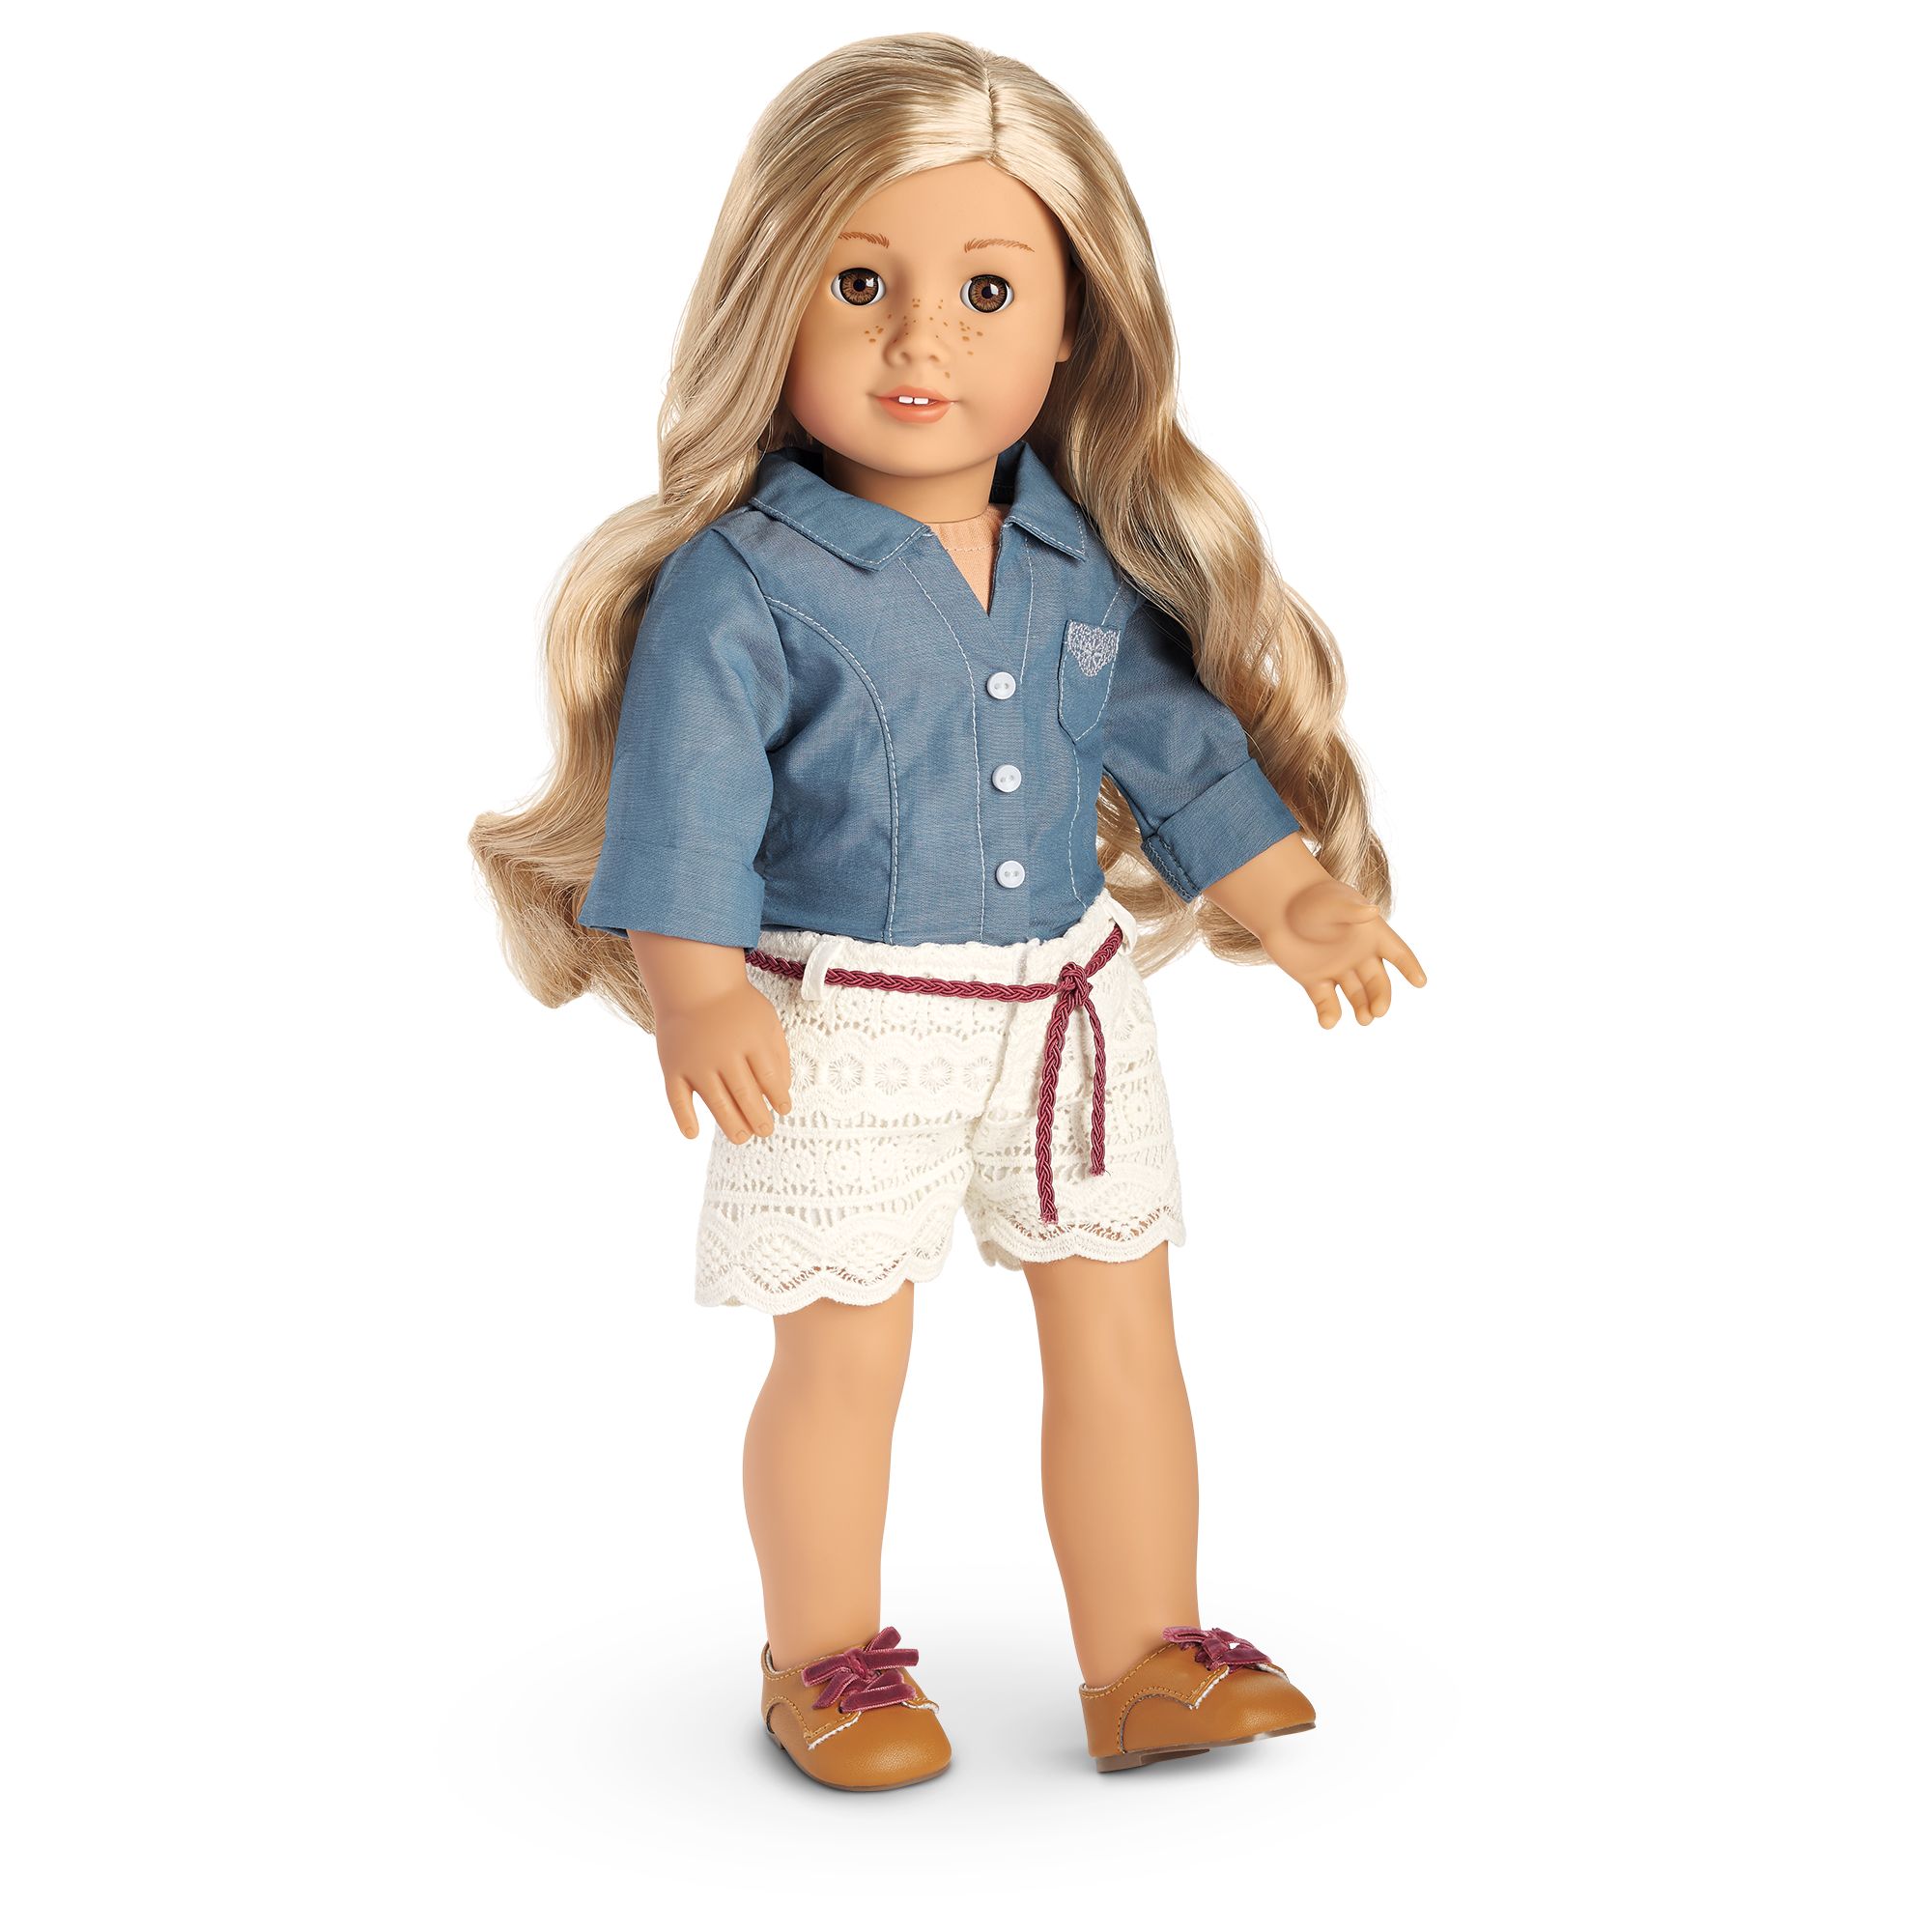 Tenney's Picnic Outfit | American Girl Wiki | FANDOM powered by Wikia